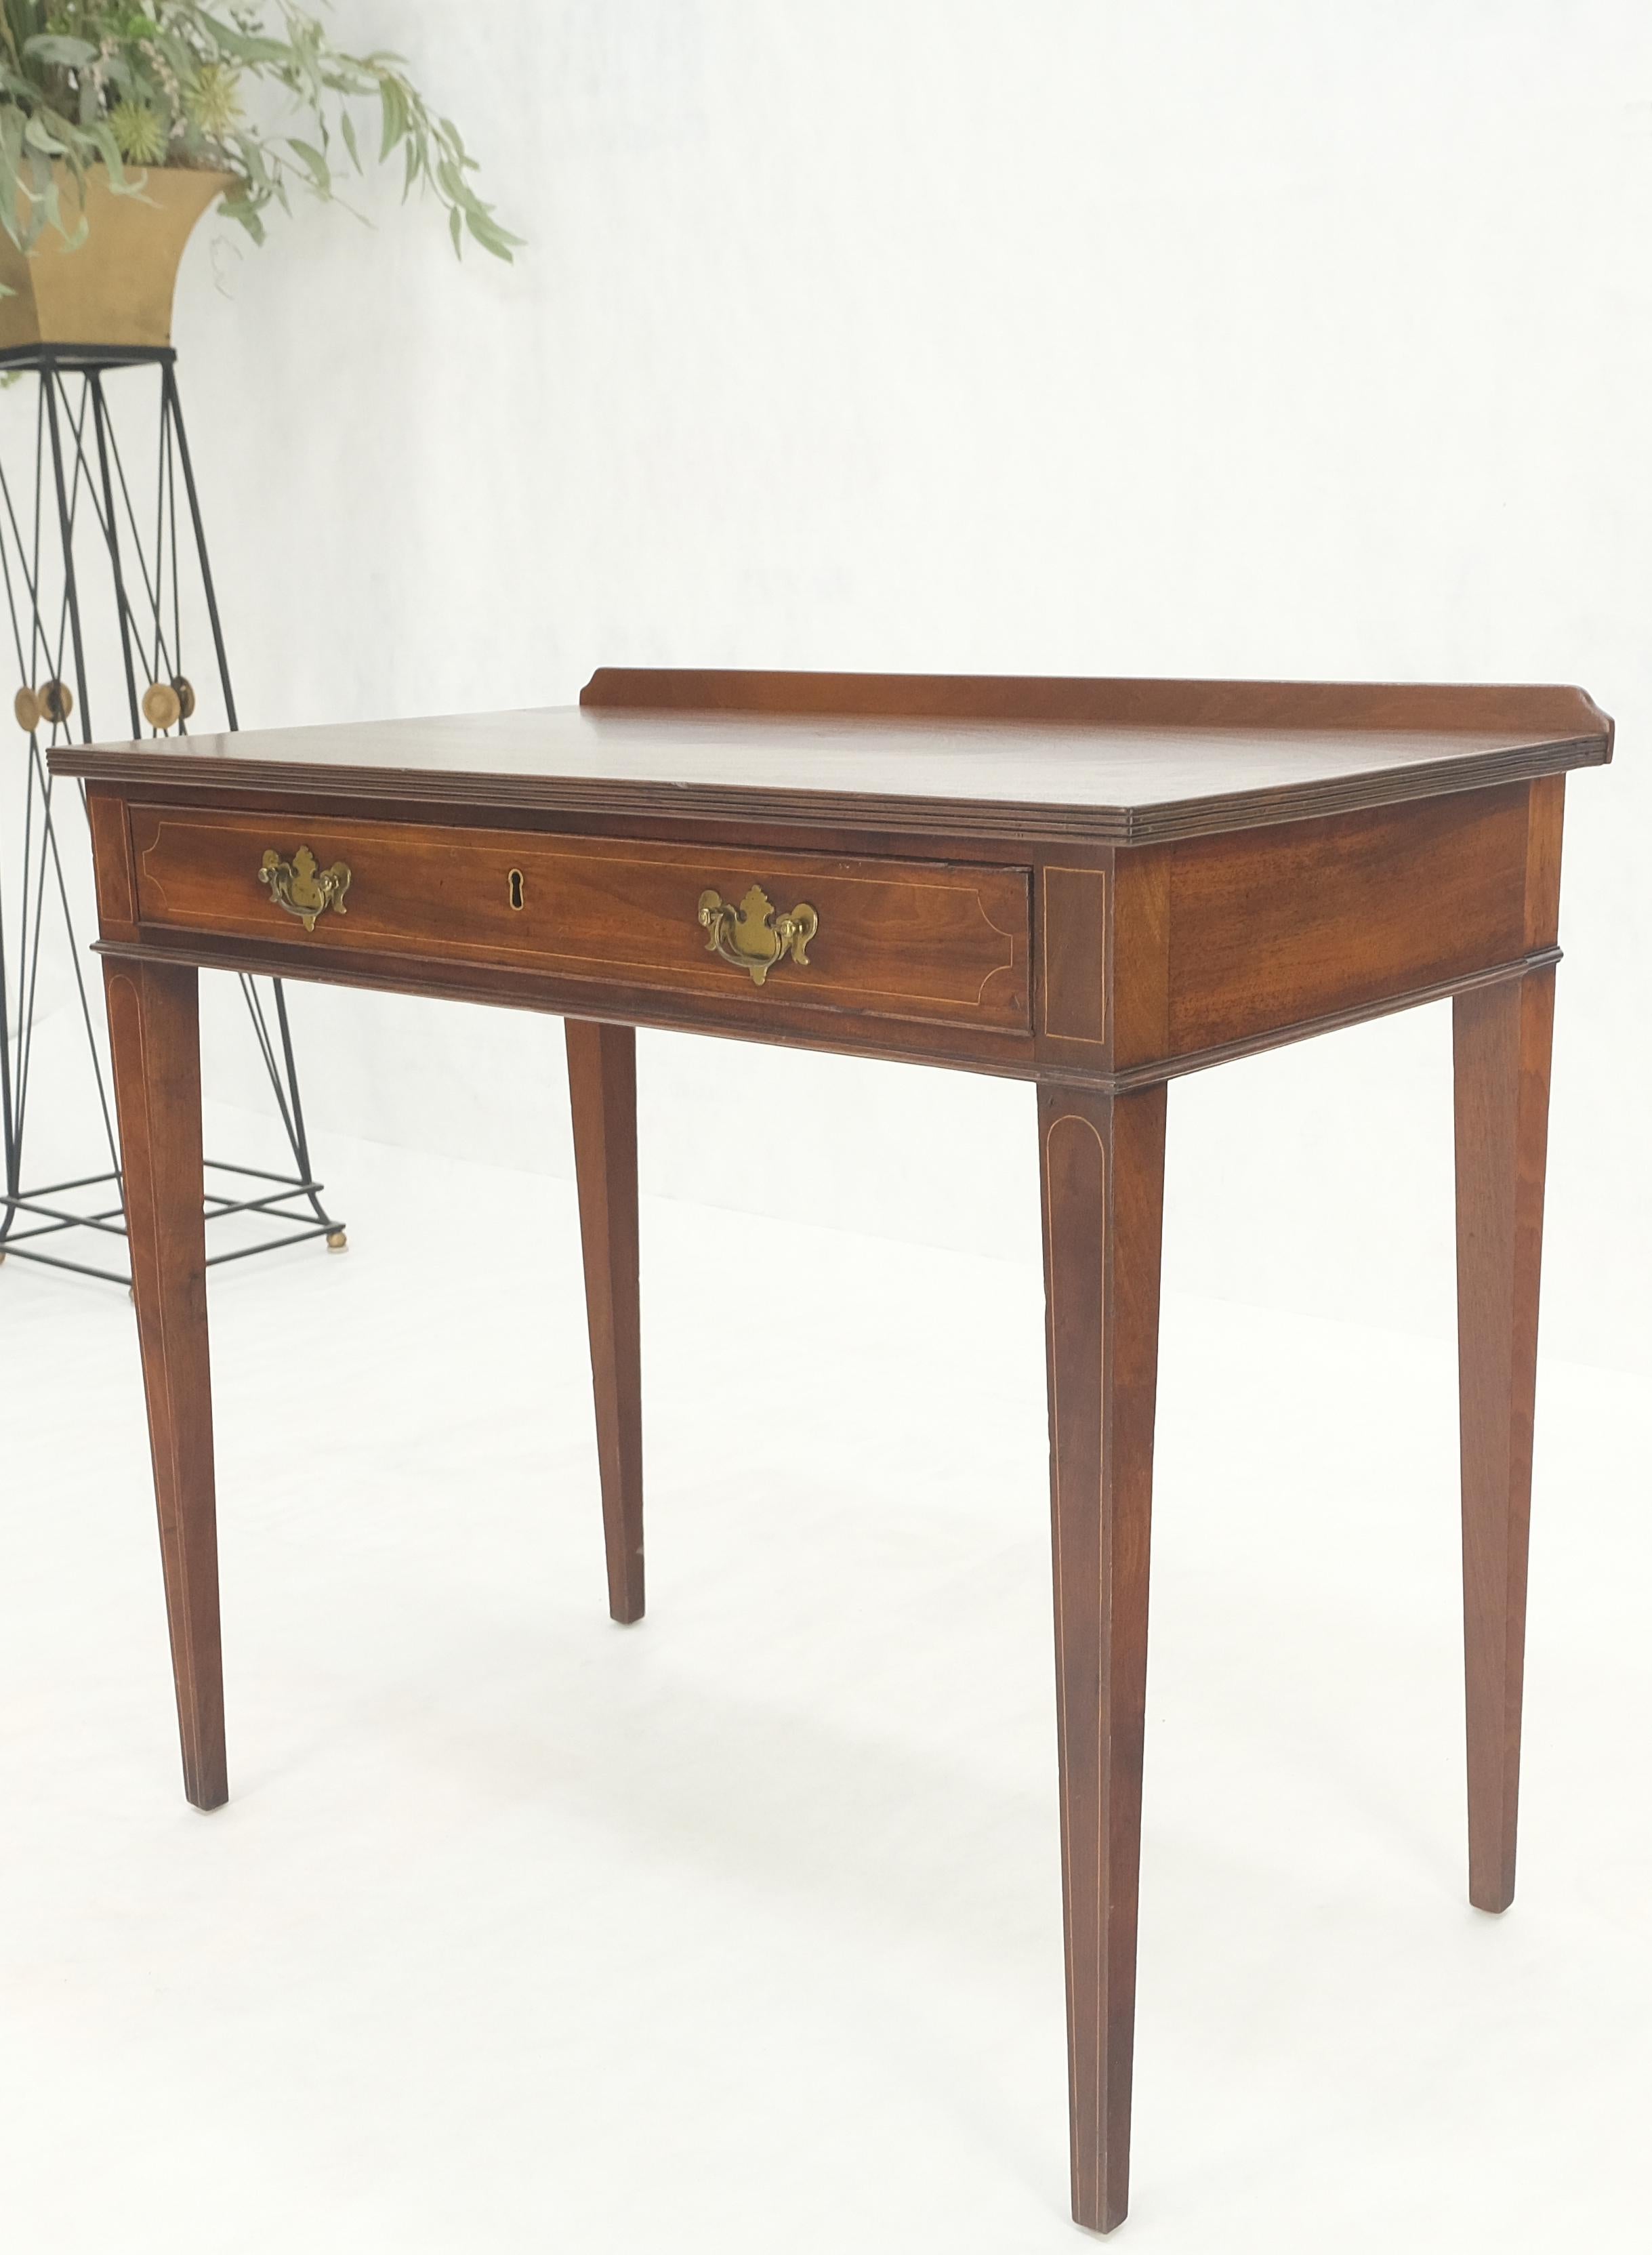 American c.1880s Fine One Drawer Inlayed Solid Crotch Mahogany Top Console Table MINT! For Sale